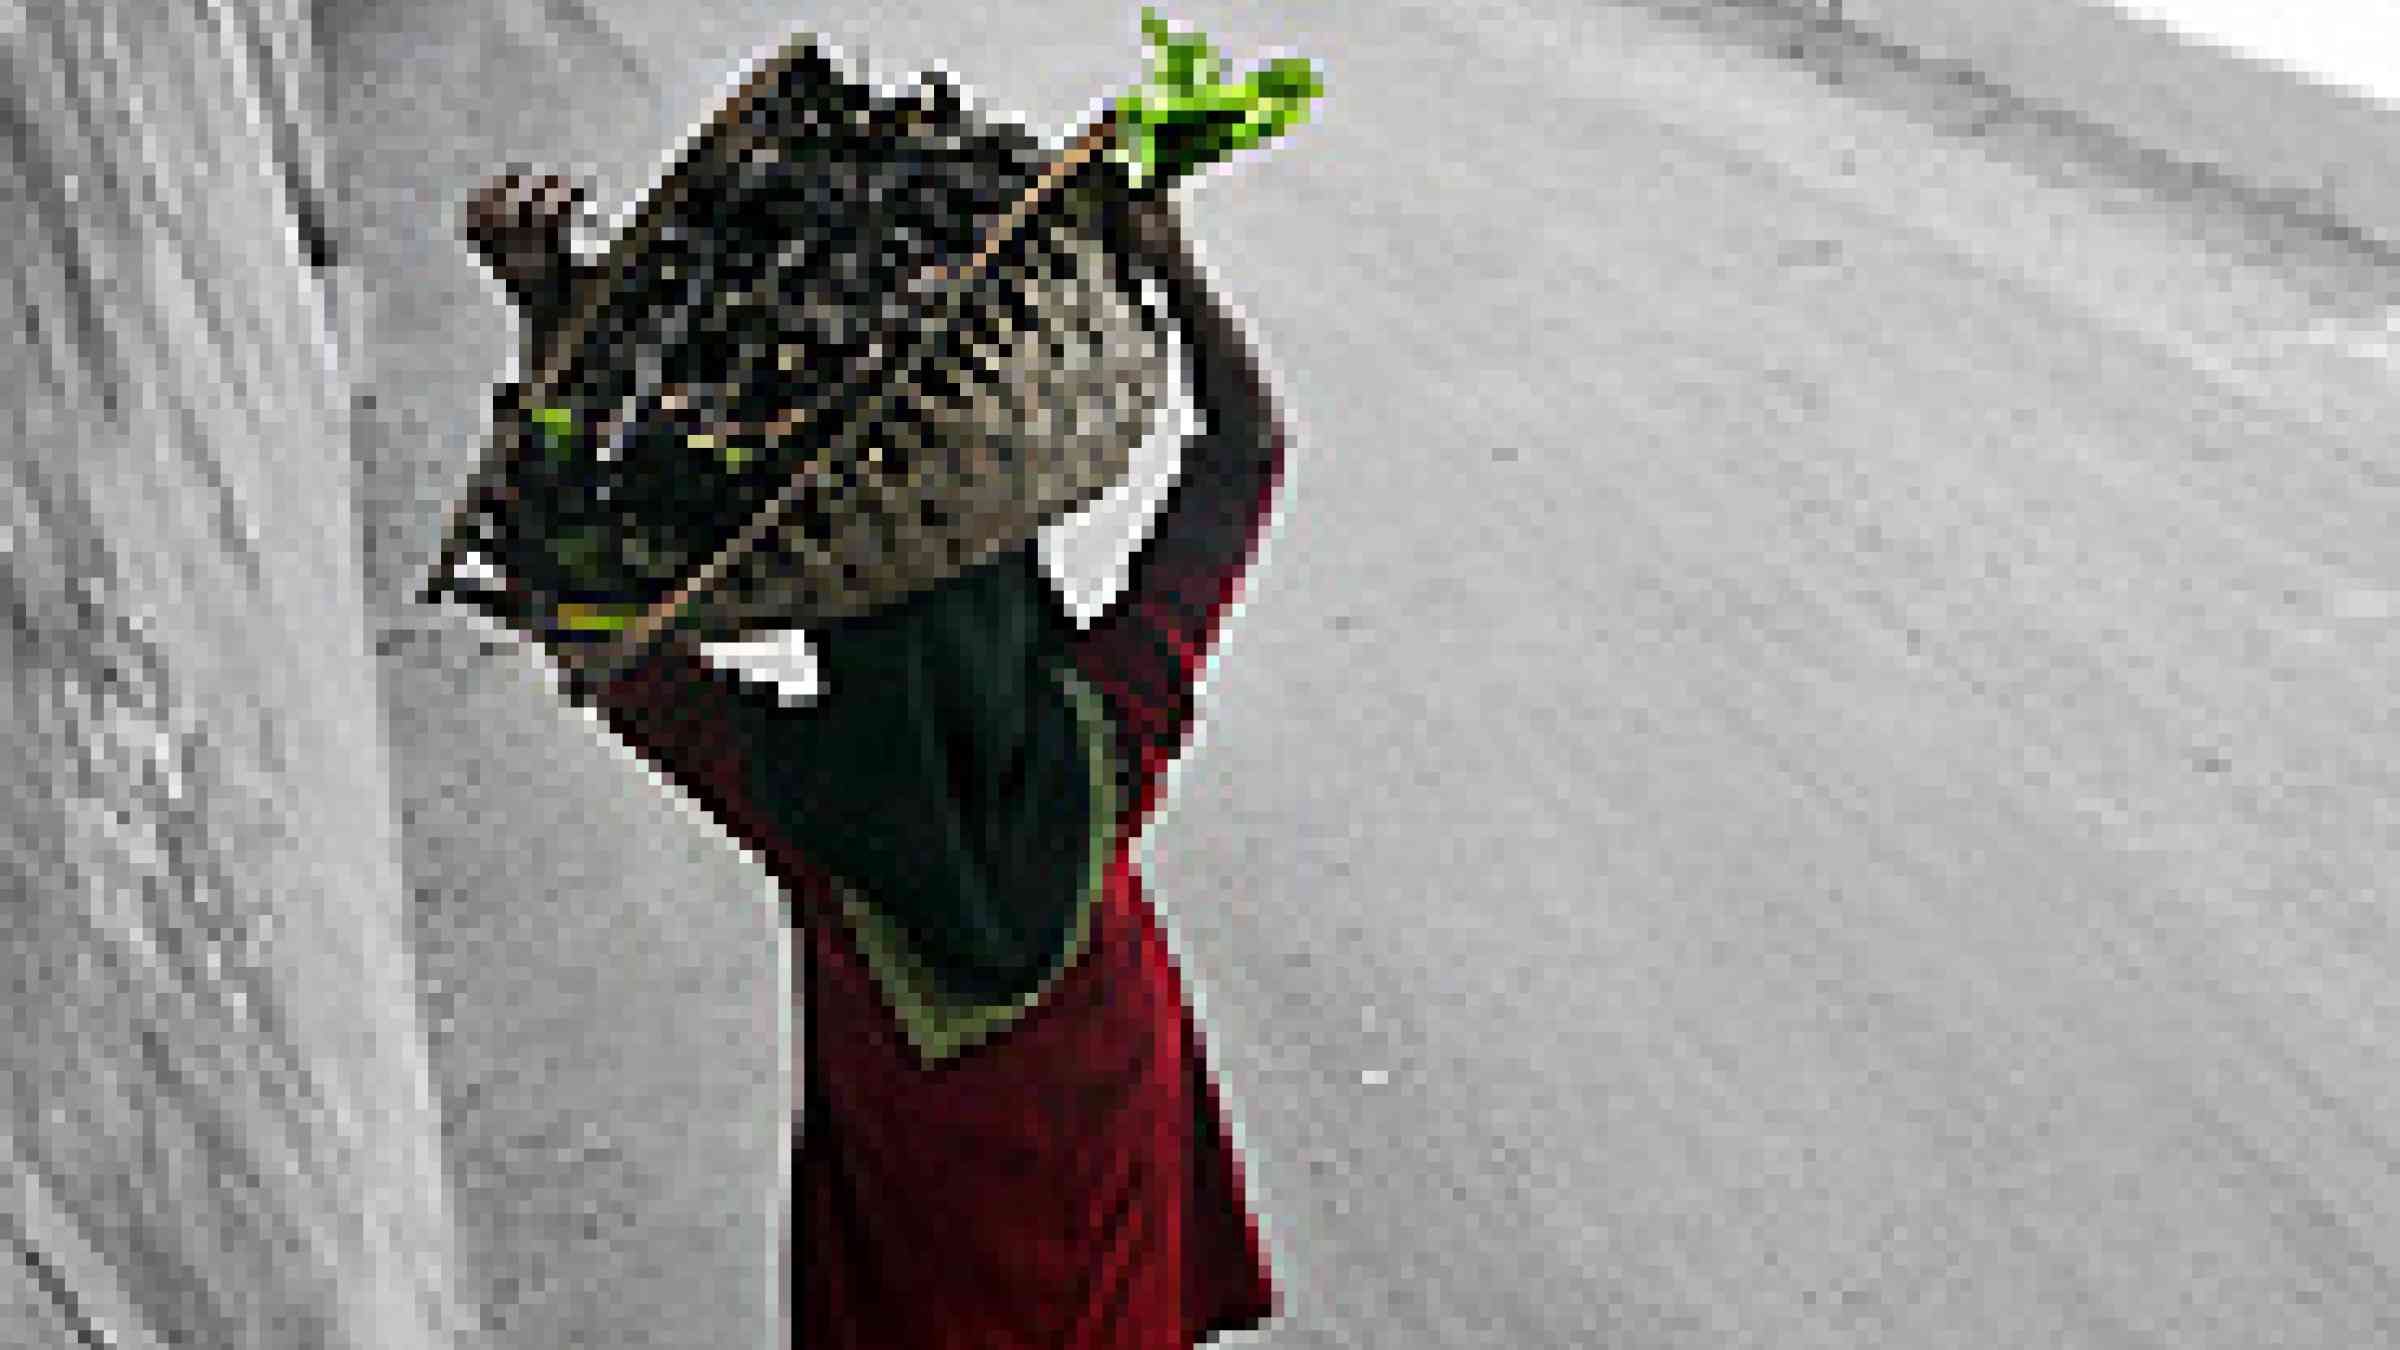 Photo of a woman in Fuvahmulah / Maldives carrying Olhuala (local yam) by Flickr user, Nattu, Creative Commons Attribution 2.0 Generic